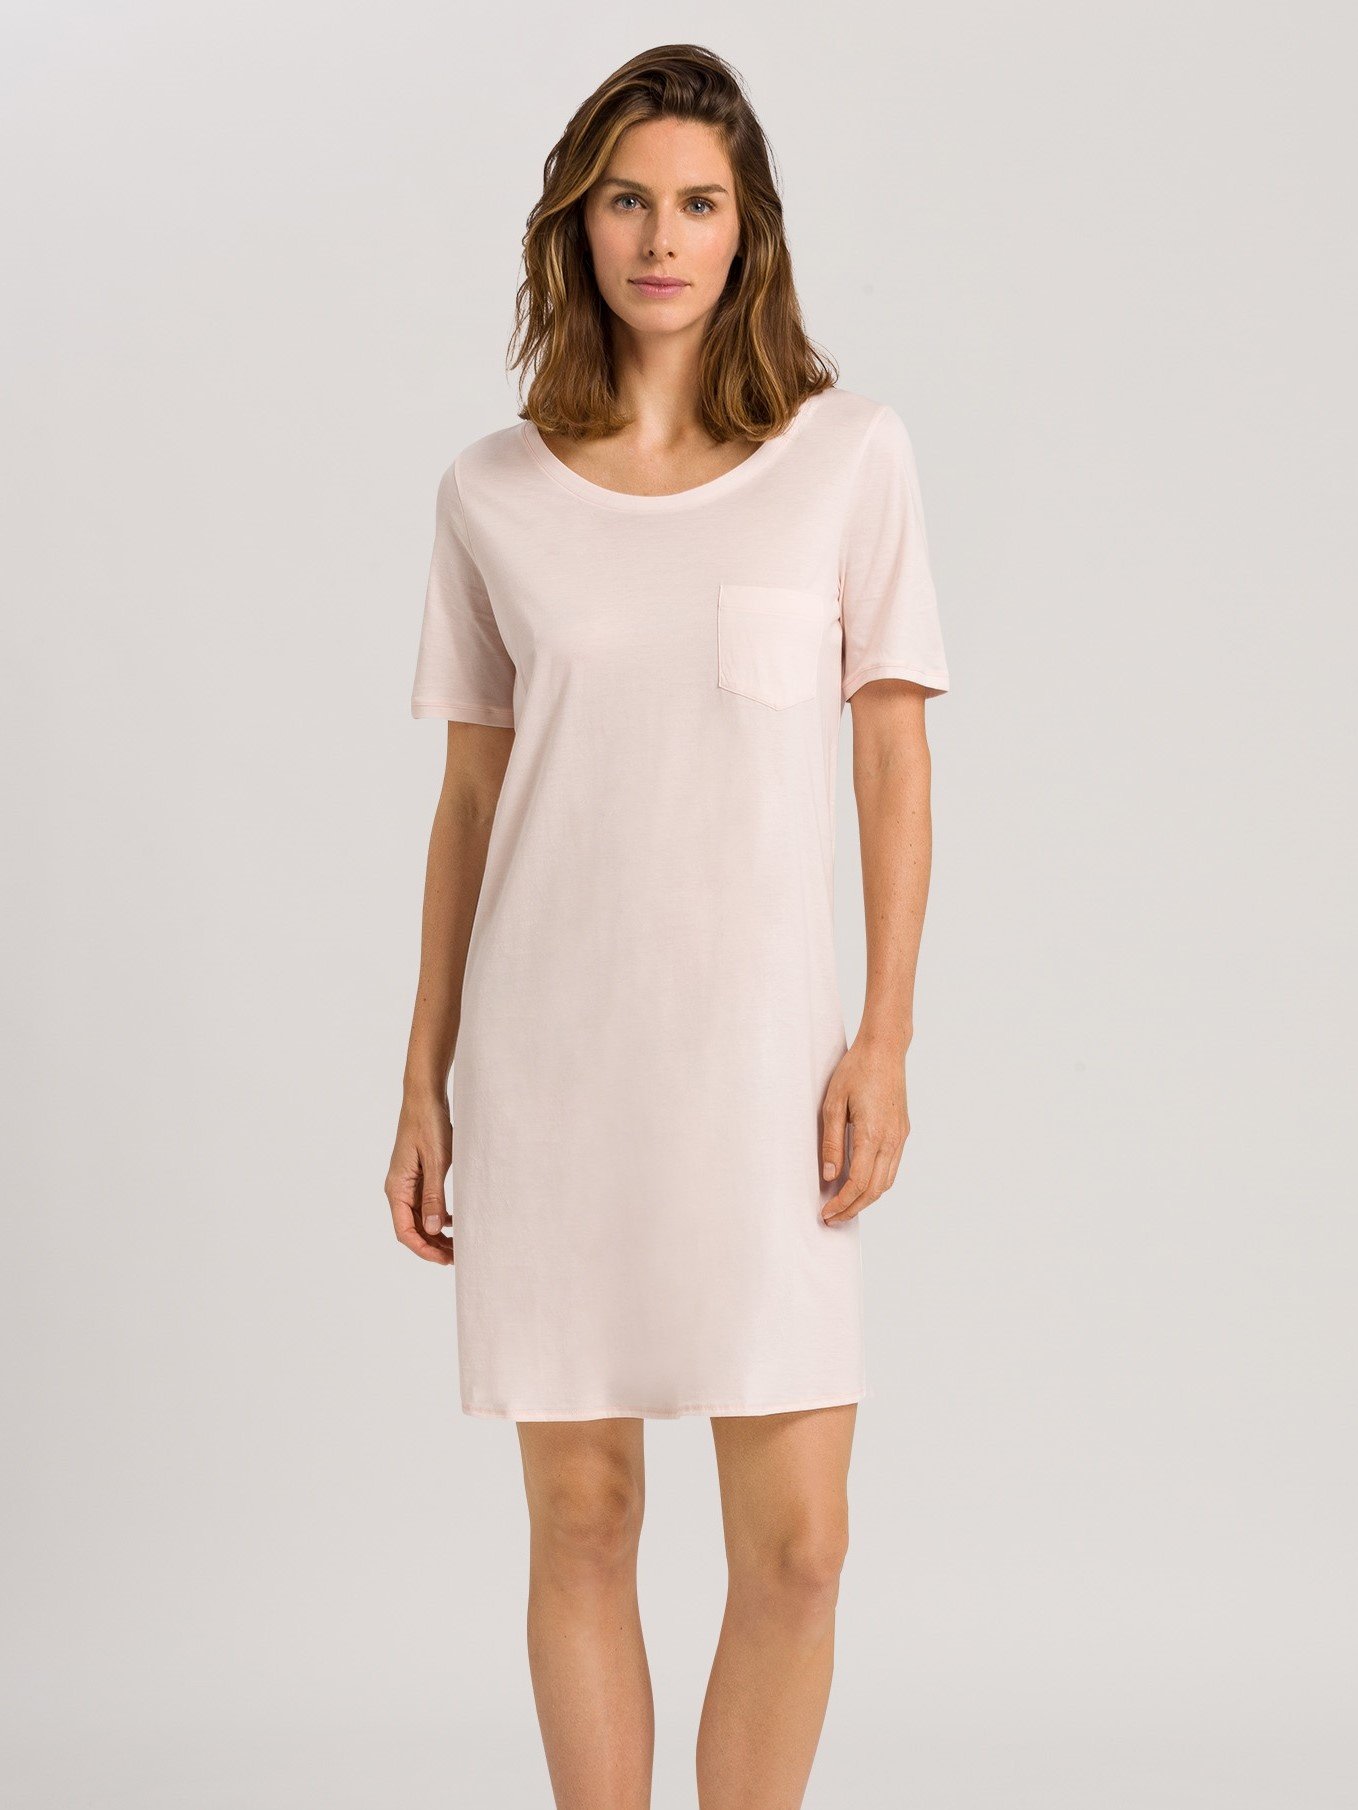 Long Sleeve Shirt in gentle pink - from the HANRO Cotton Seamless collection